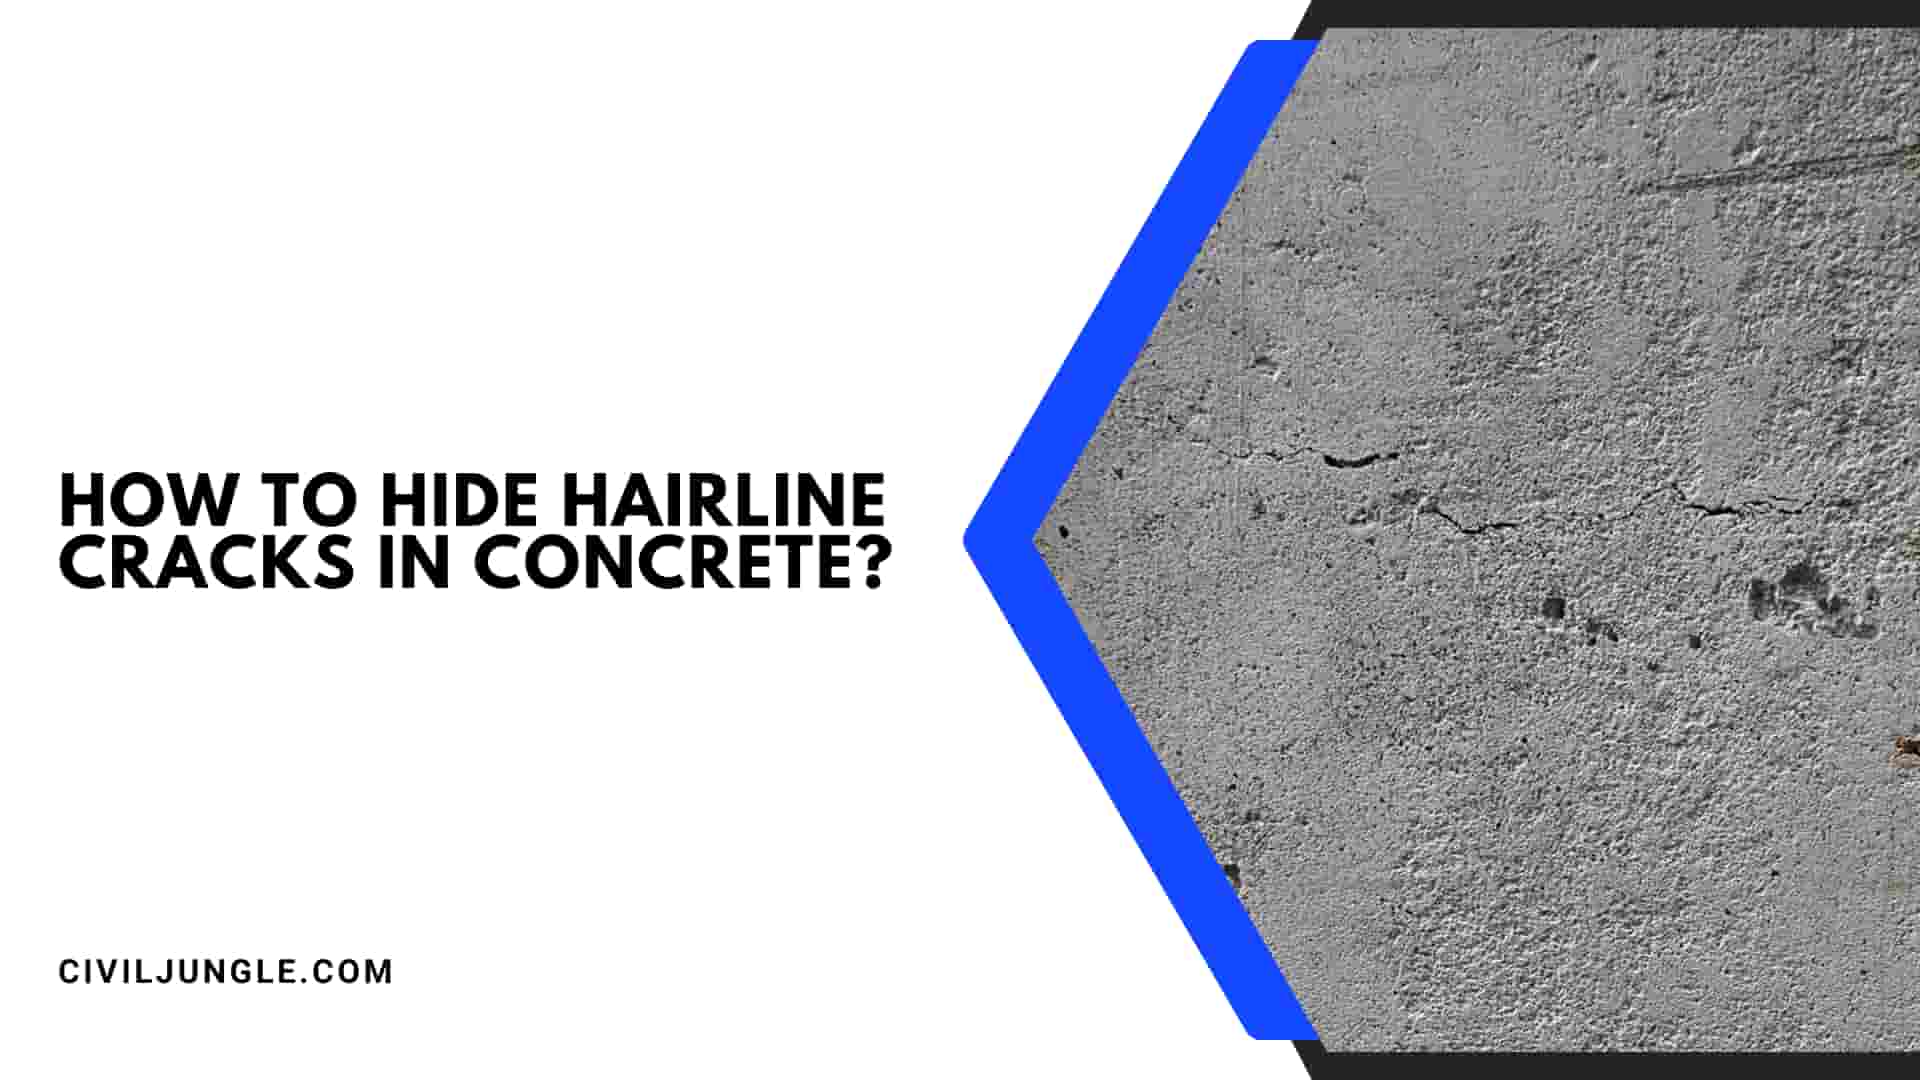 How To Hide Hairline Cracks In Concrete?